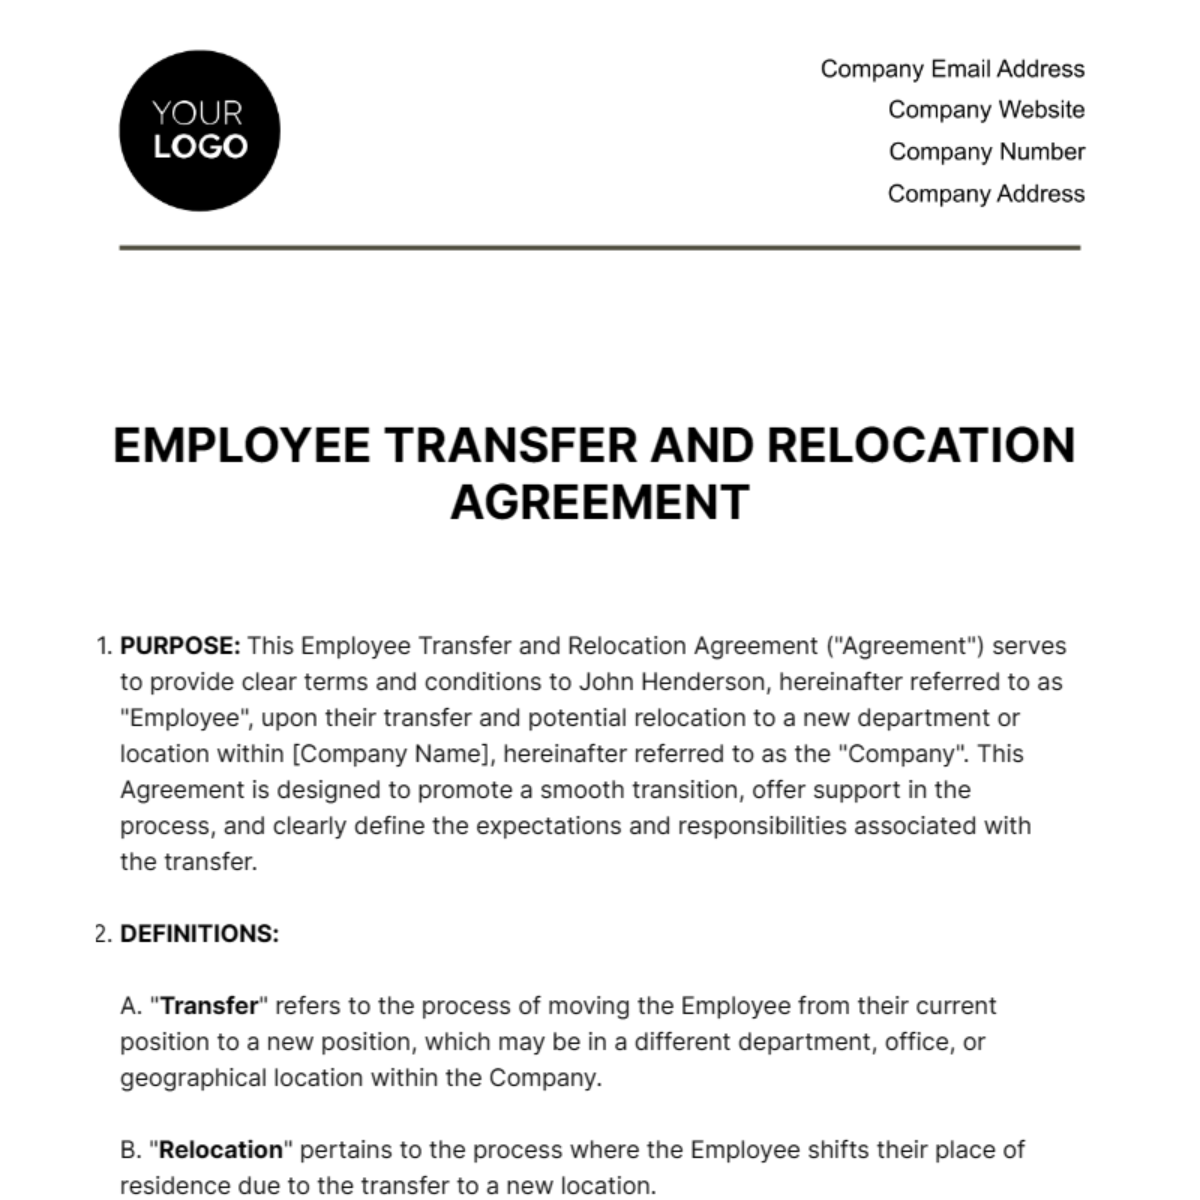 Employee Transfer and Relocation Agreement HR Template